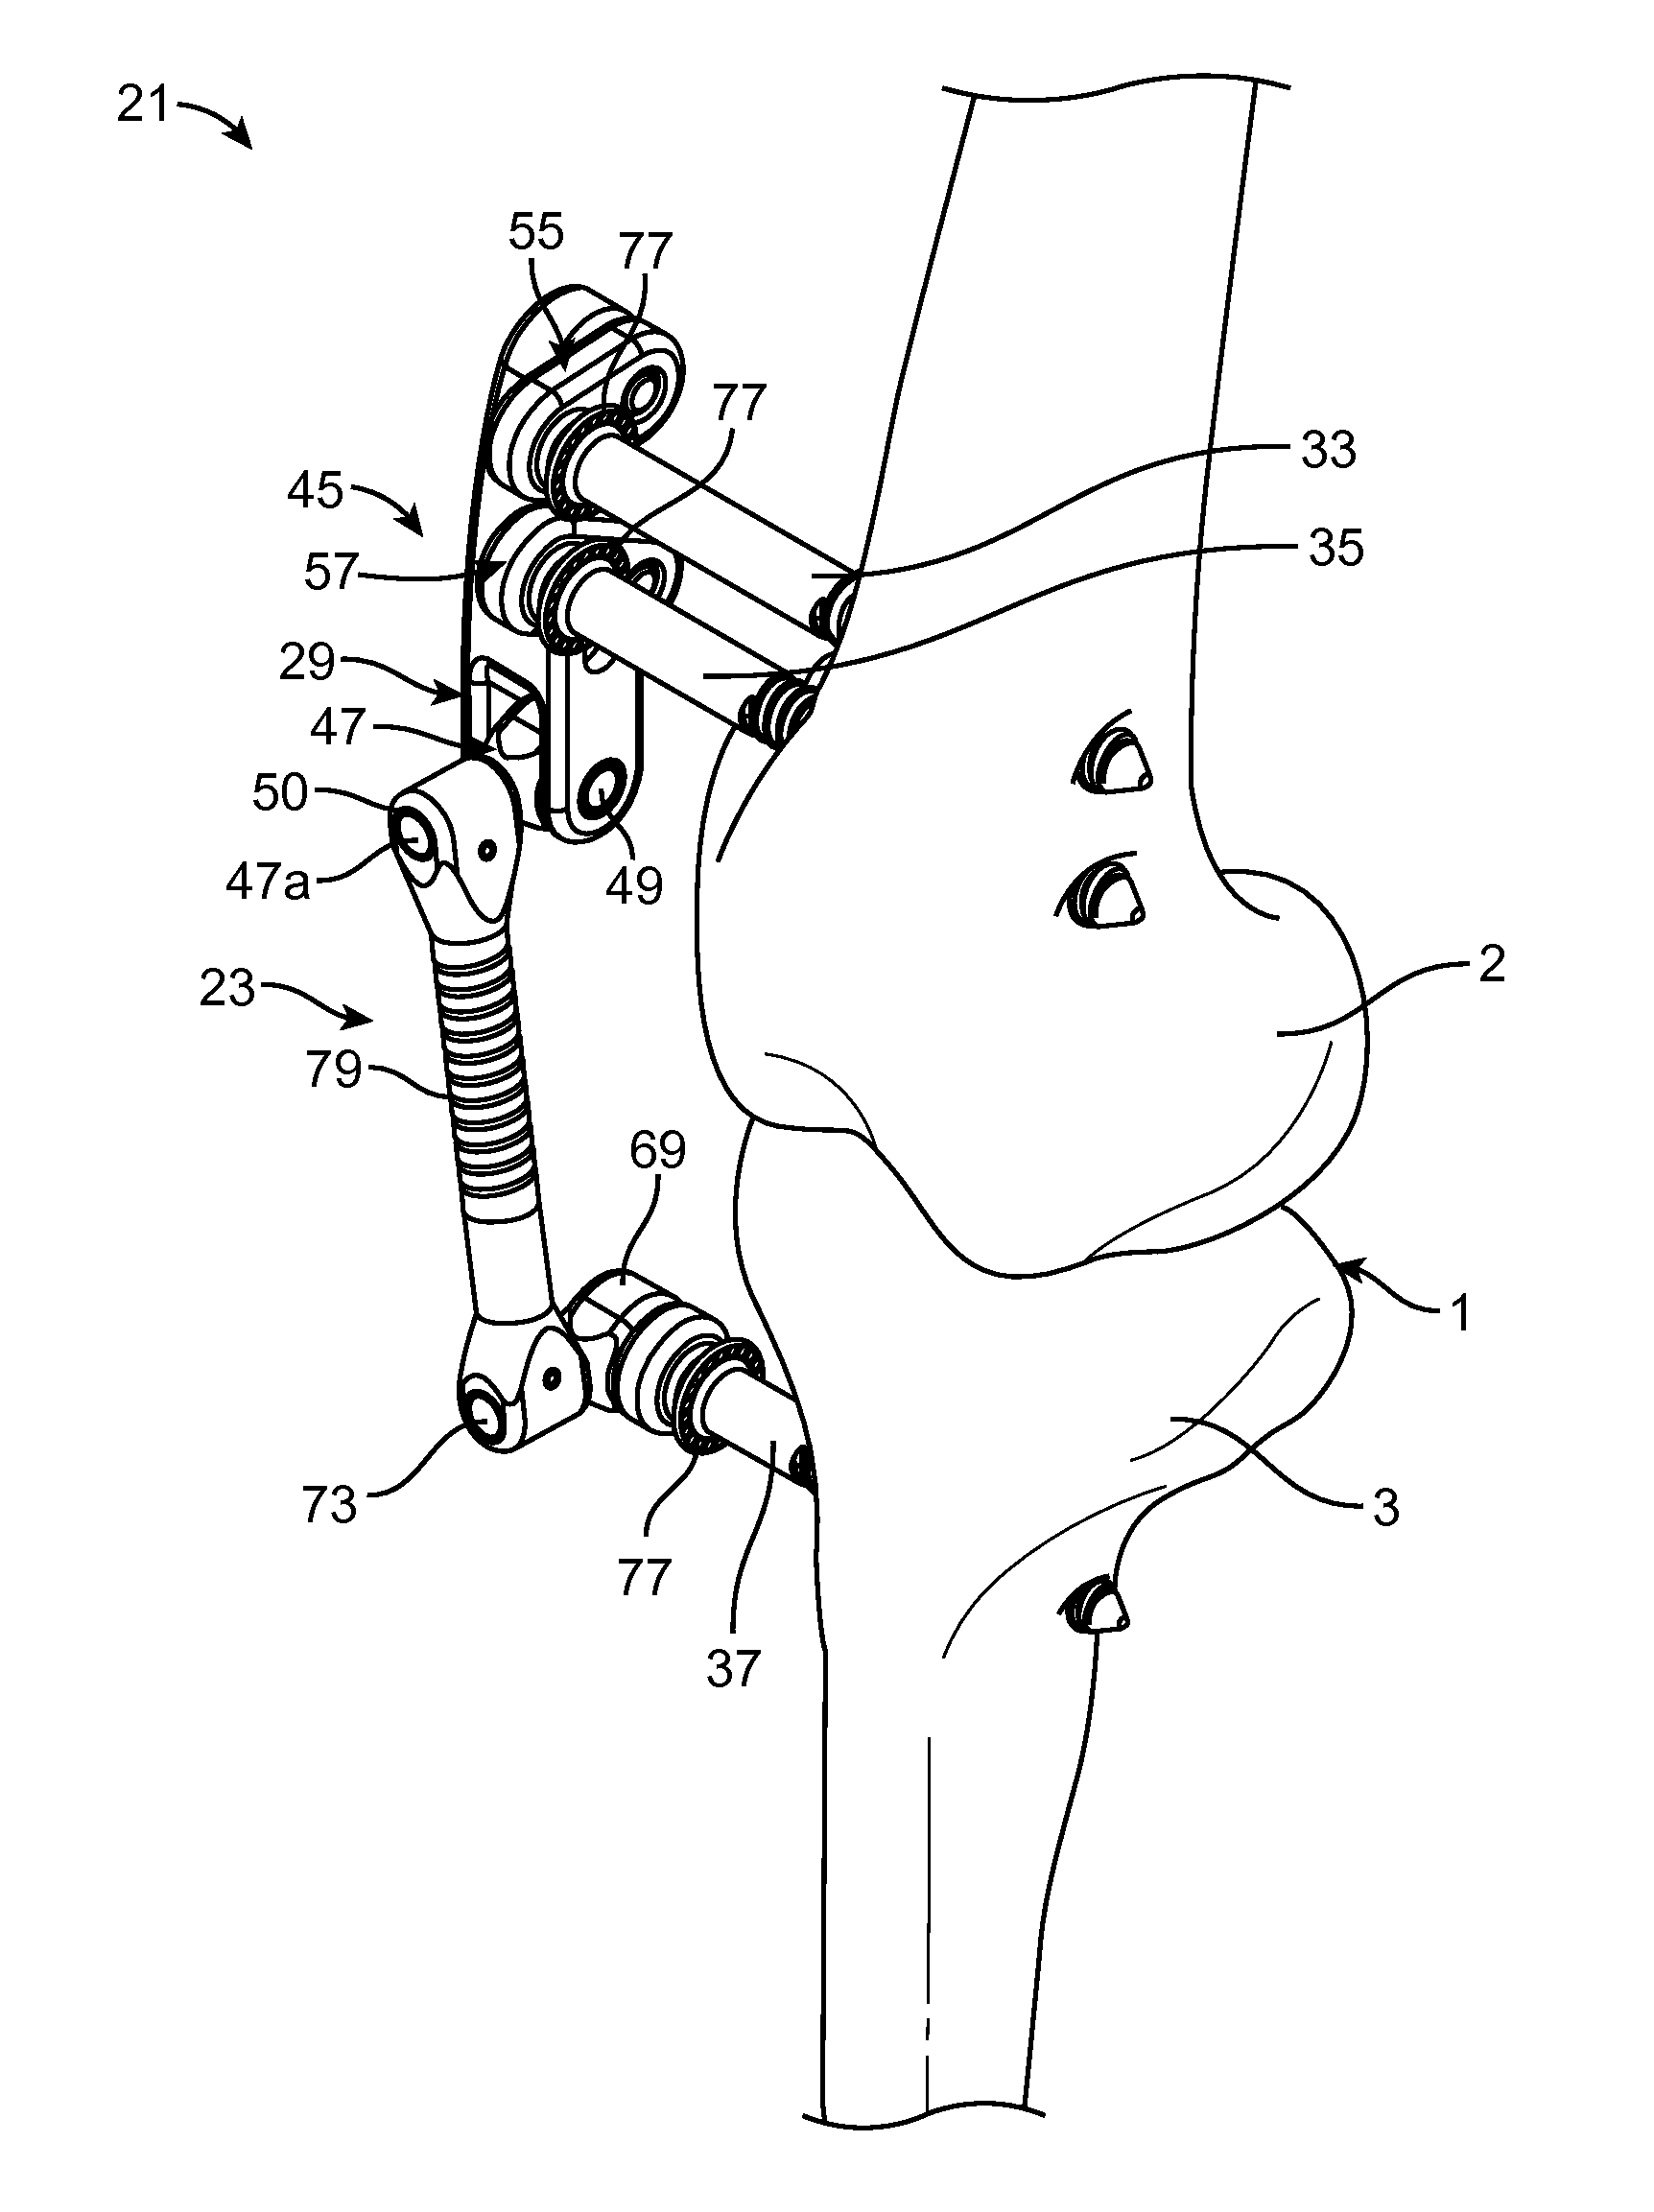 Transcutaneous Joint Unloading Device and Method